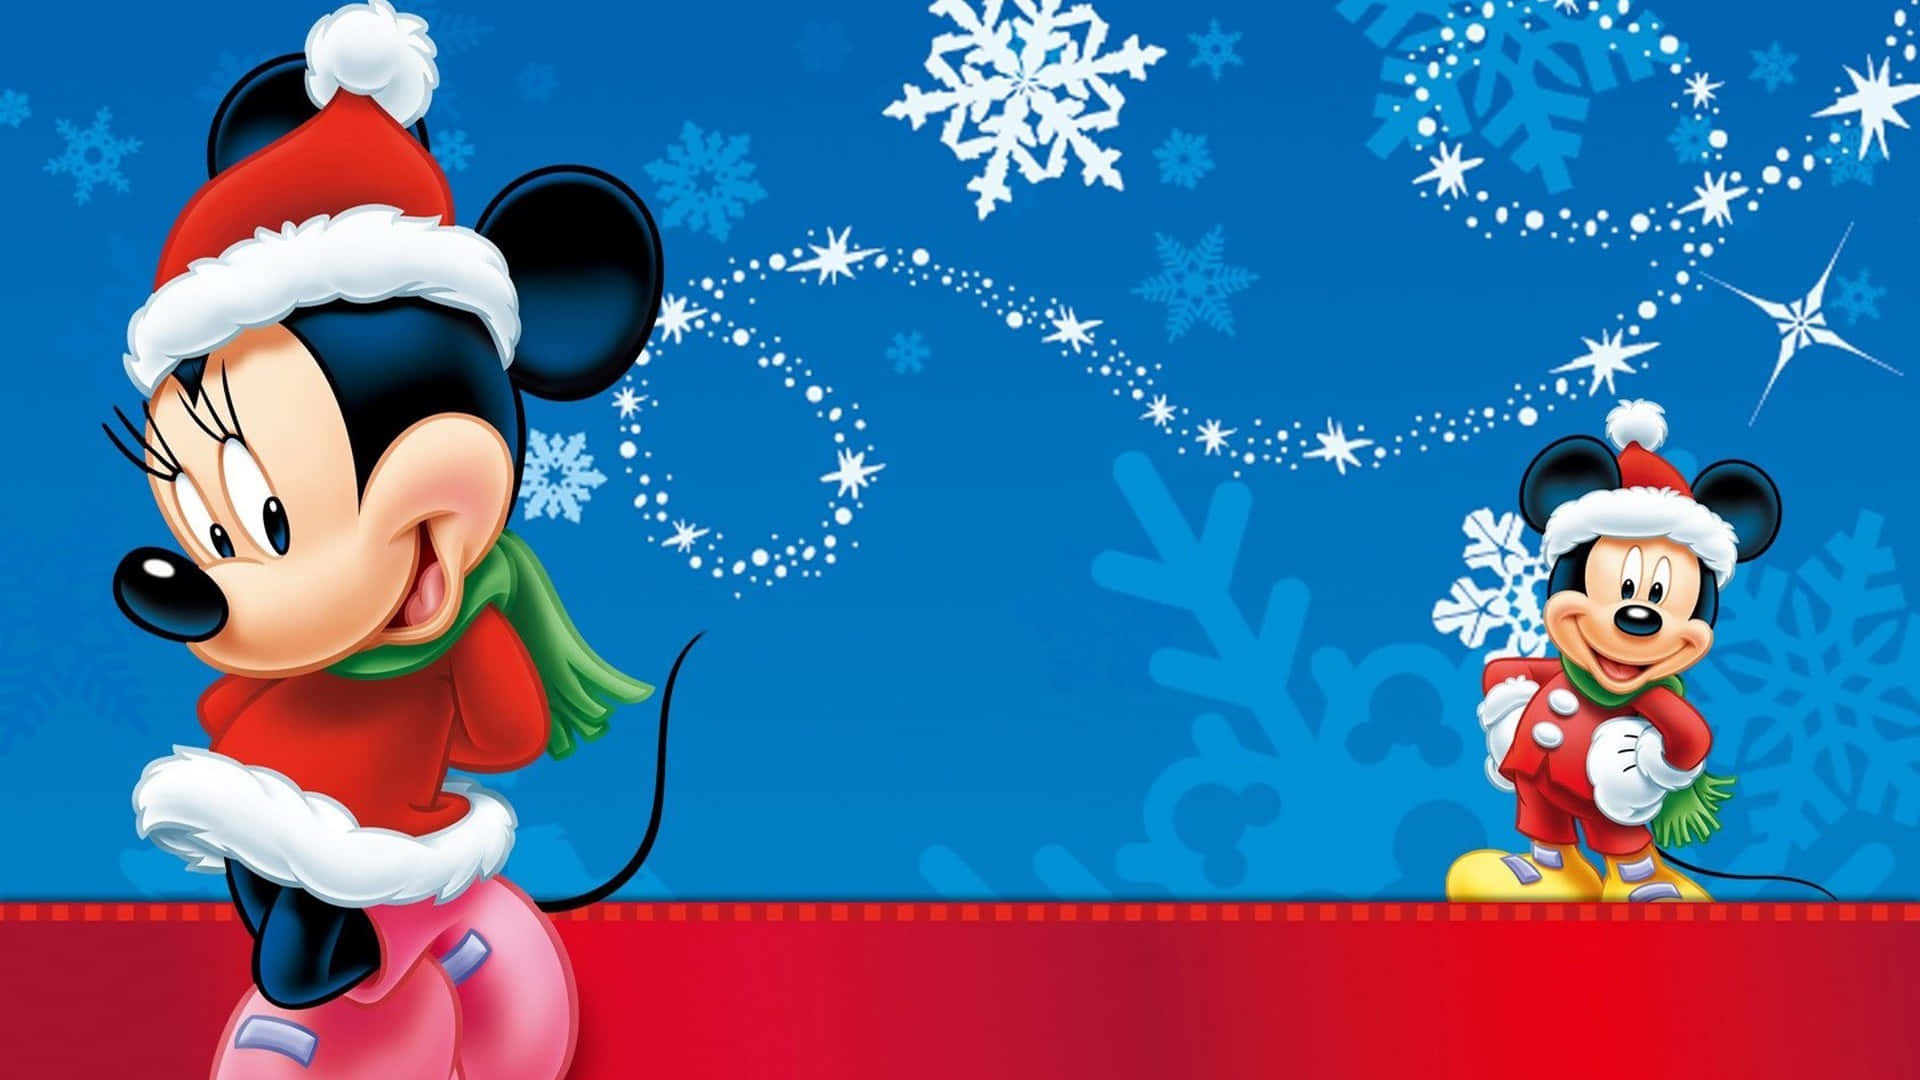 Get into the holiday spirit with the Disney Christmas iPad Wallpaper